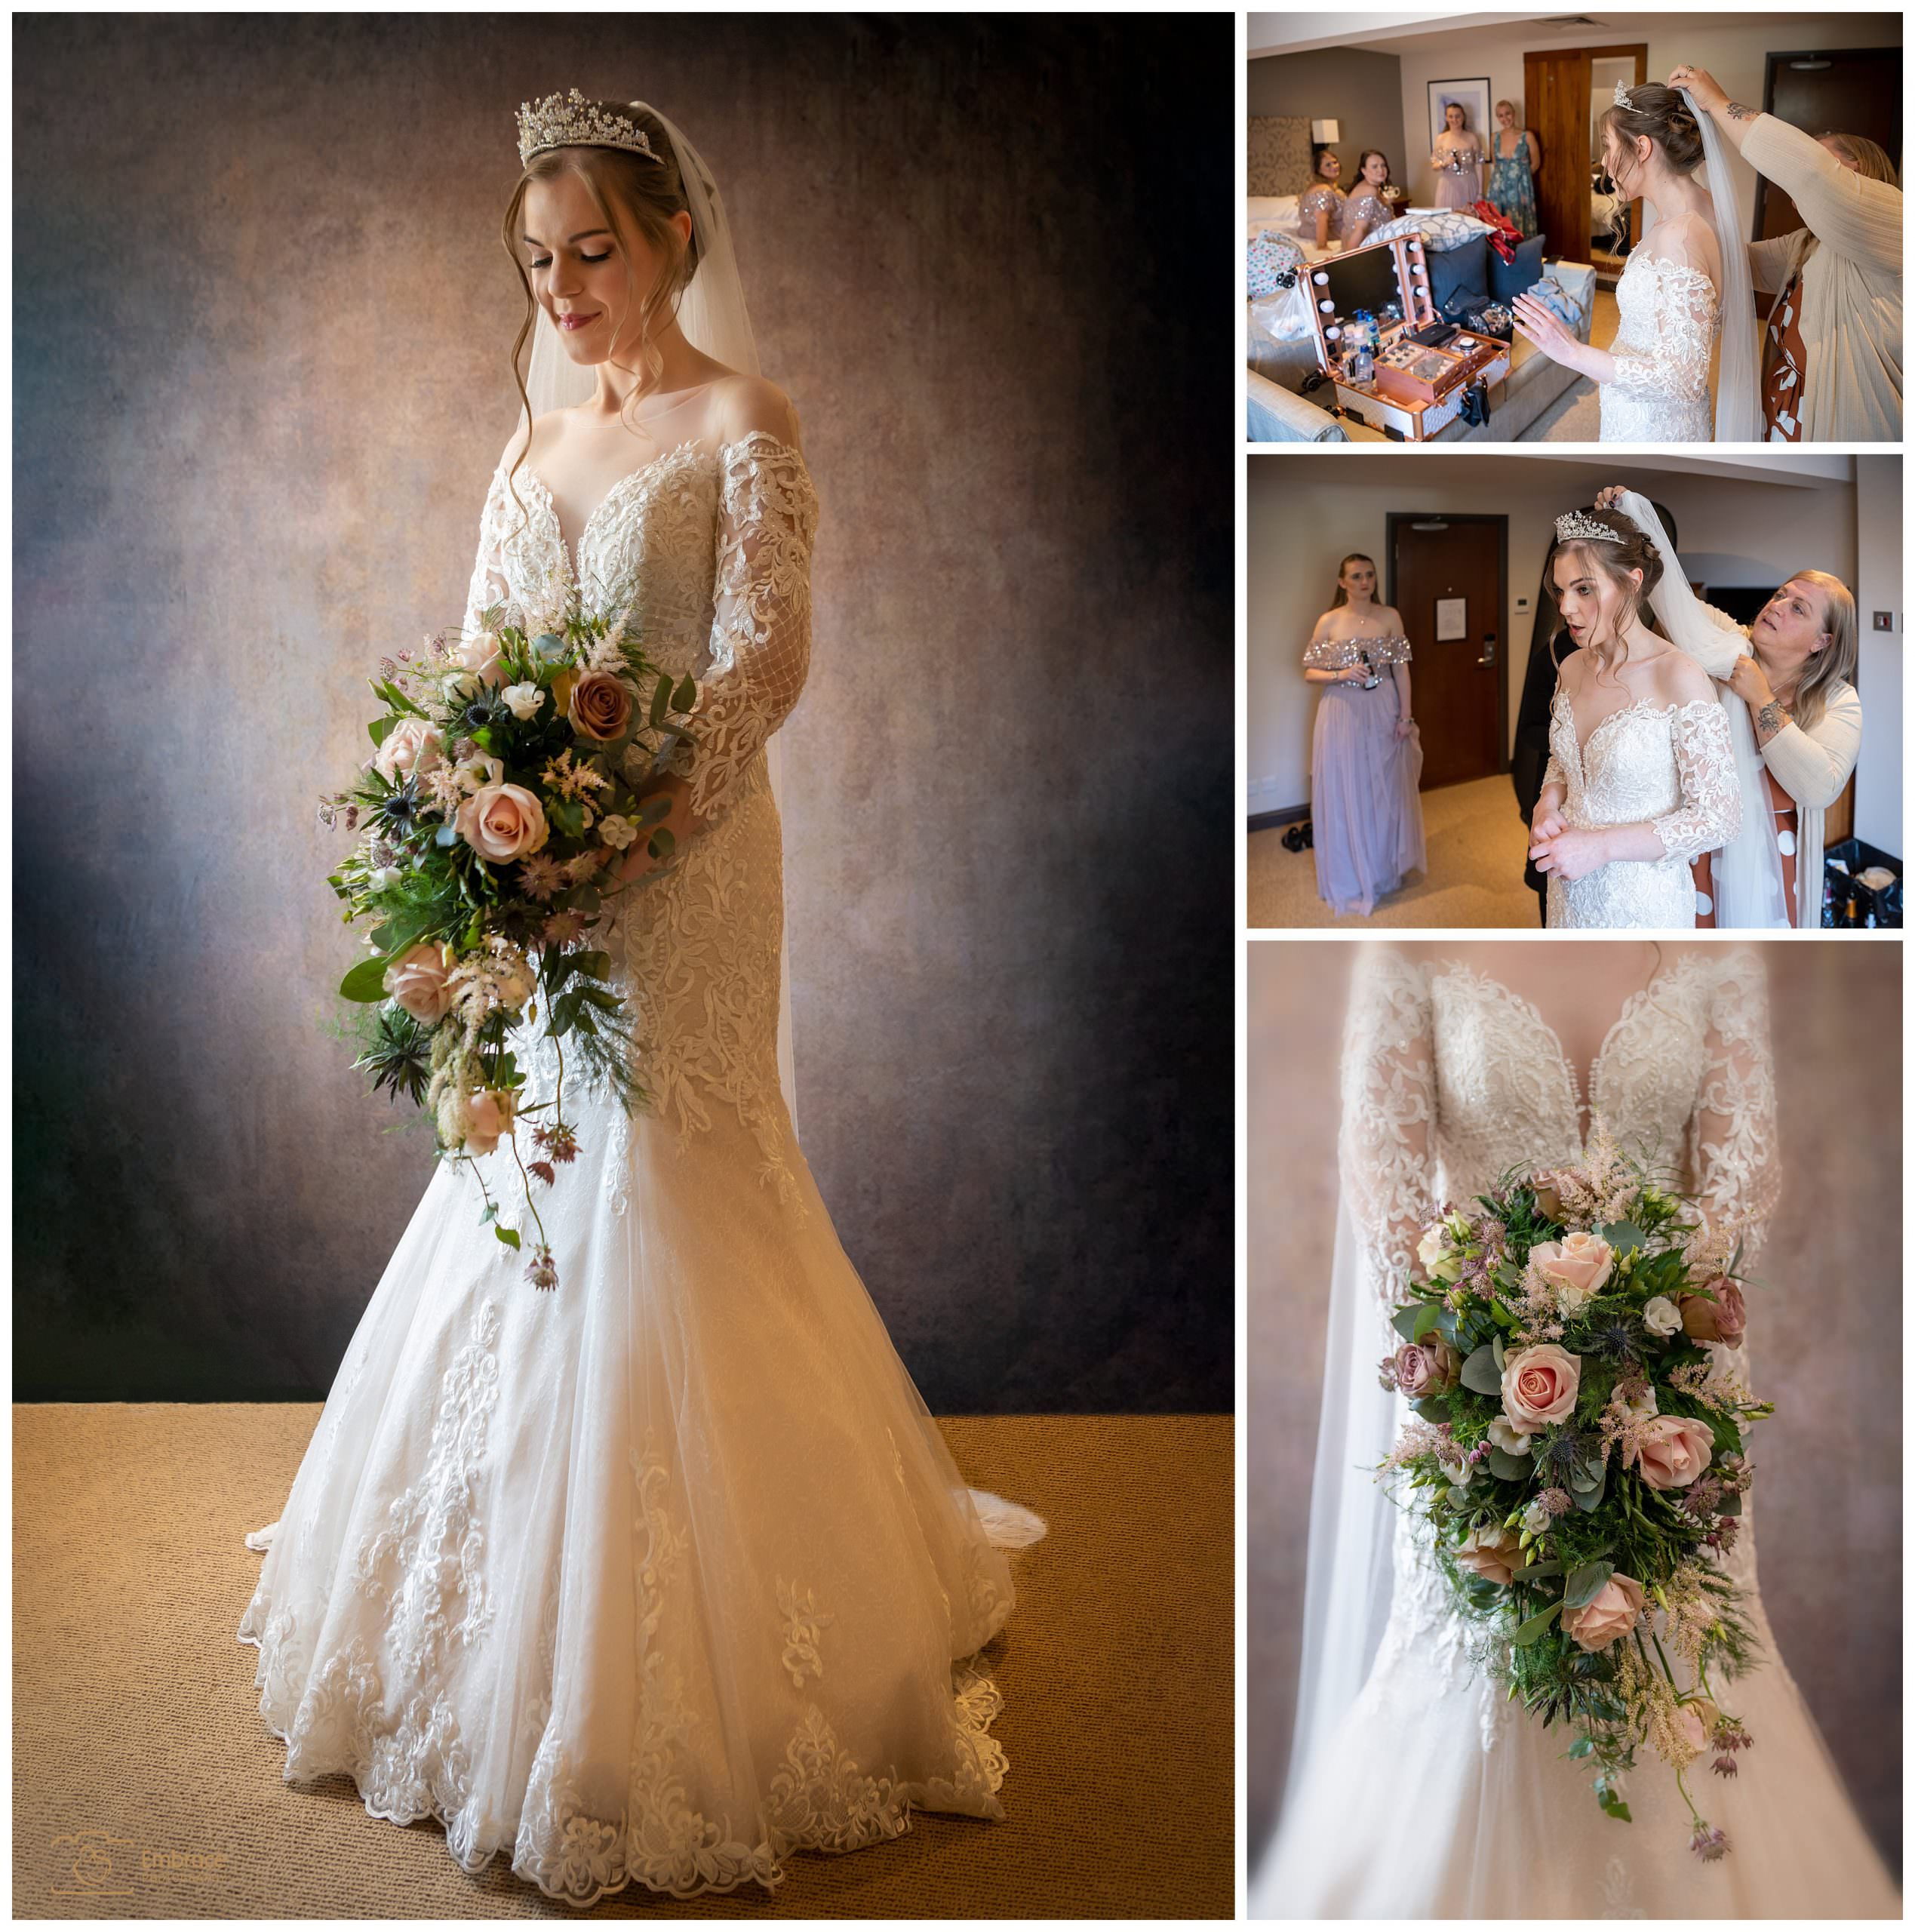 Bride showing off her wedding dress holding a bouquet of roses